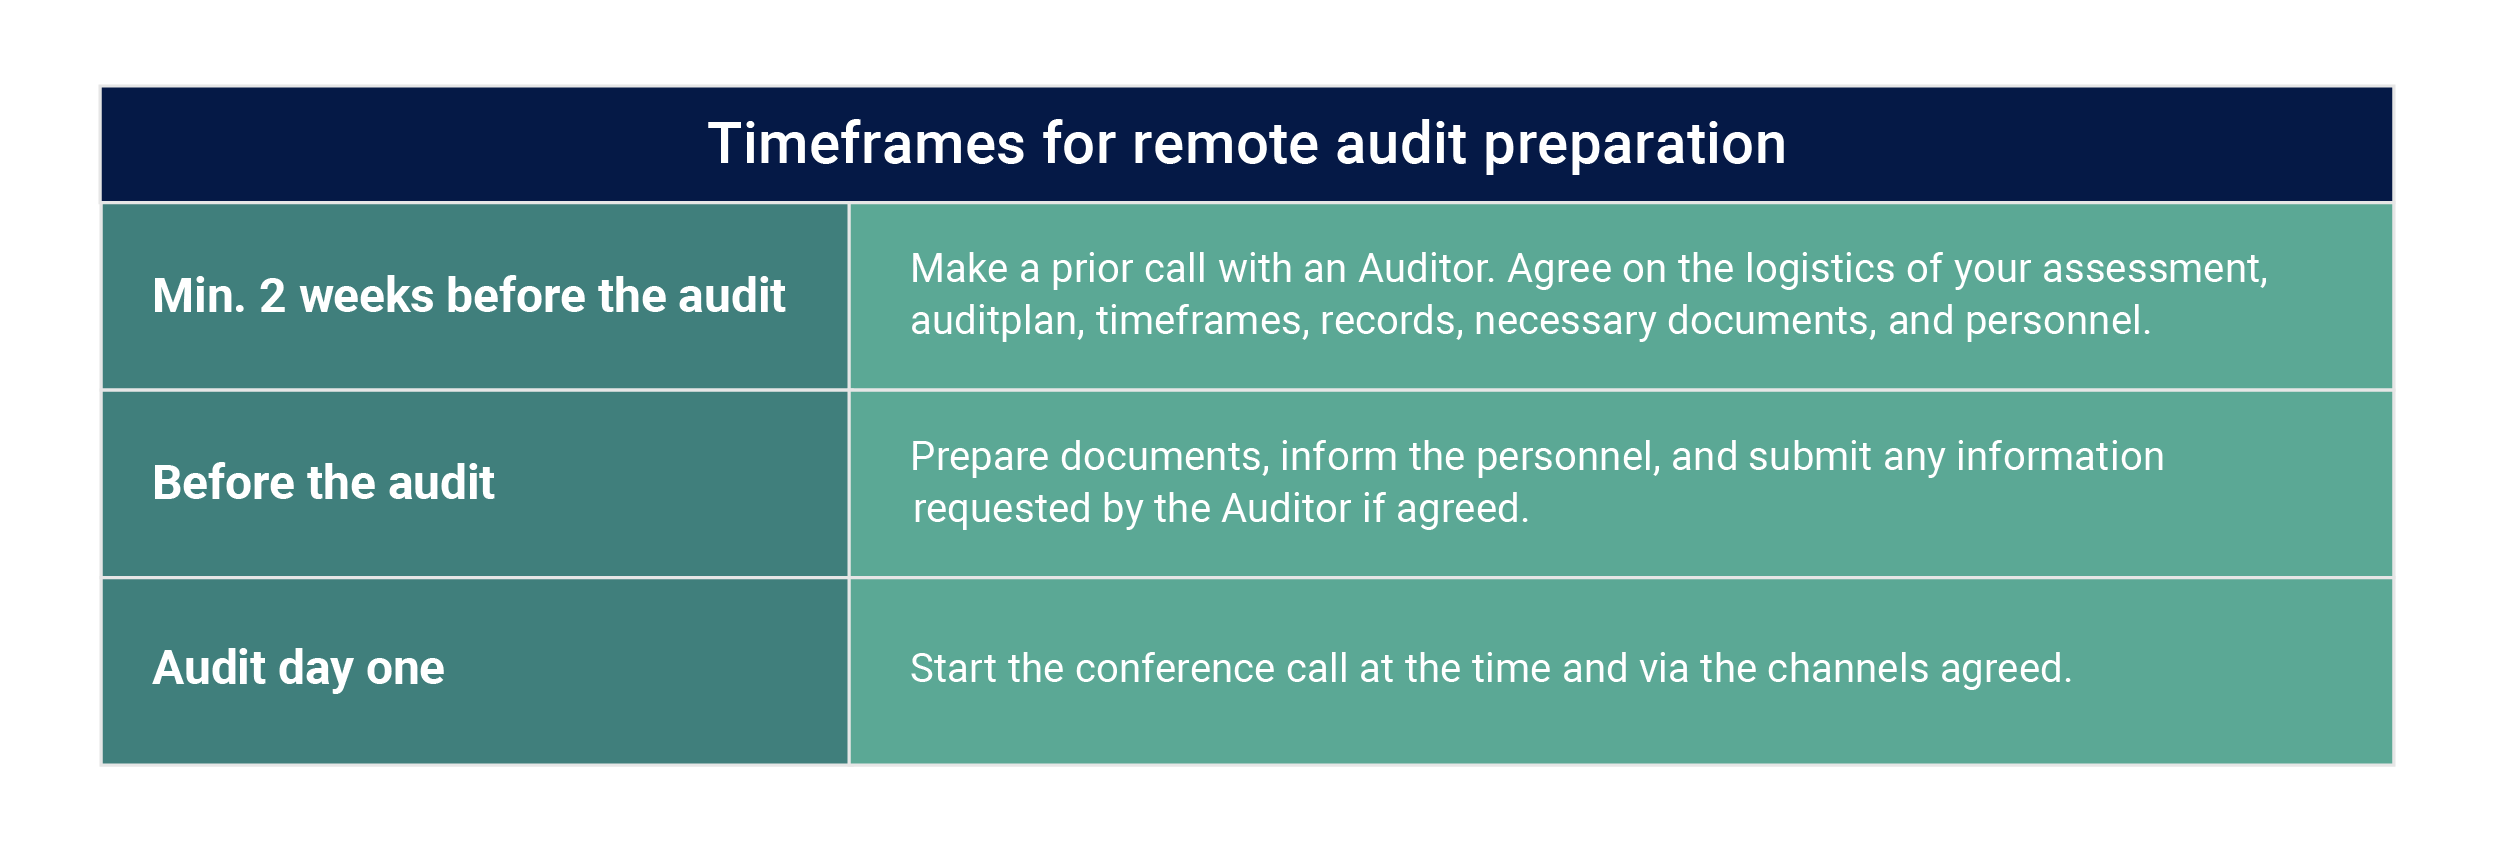 Remote audit tool, iso27001 audit